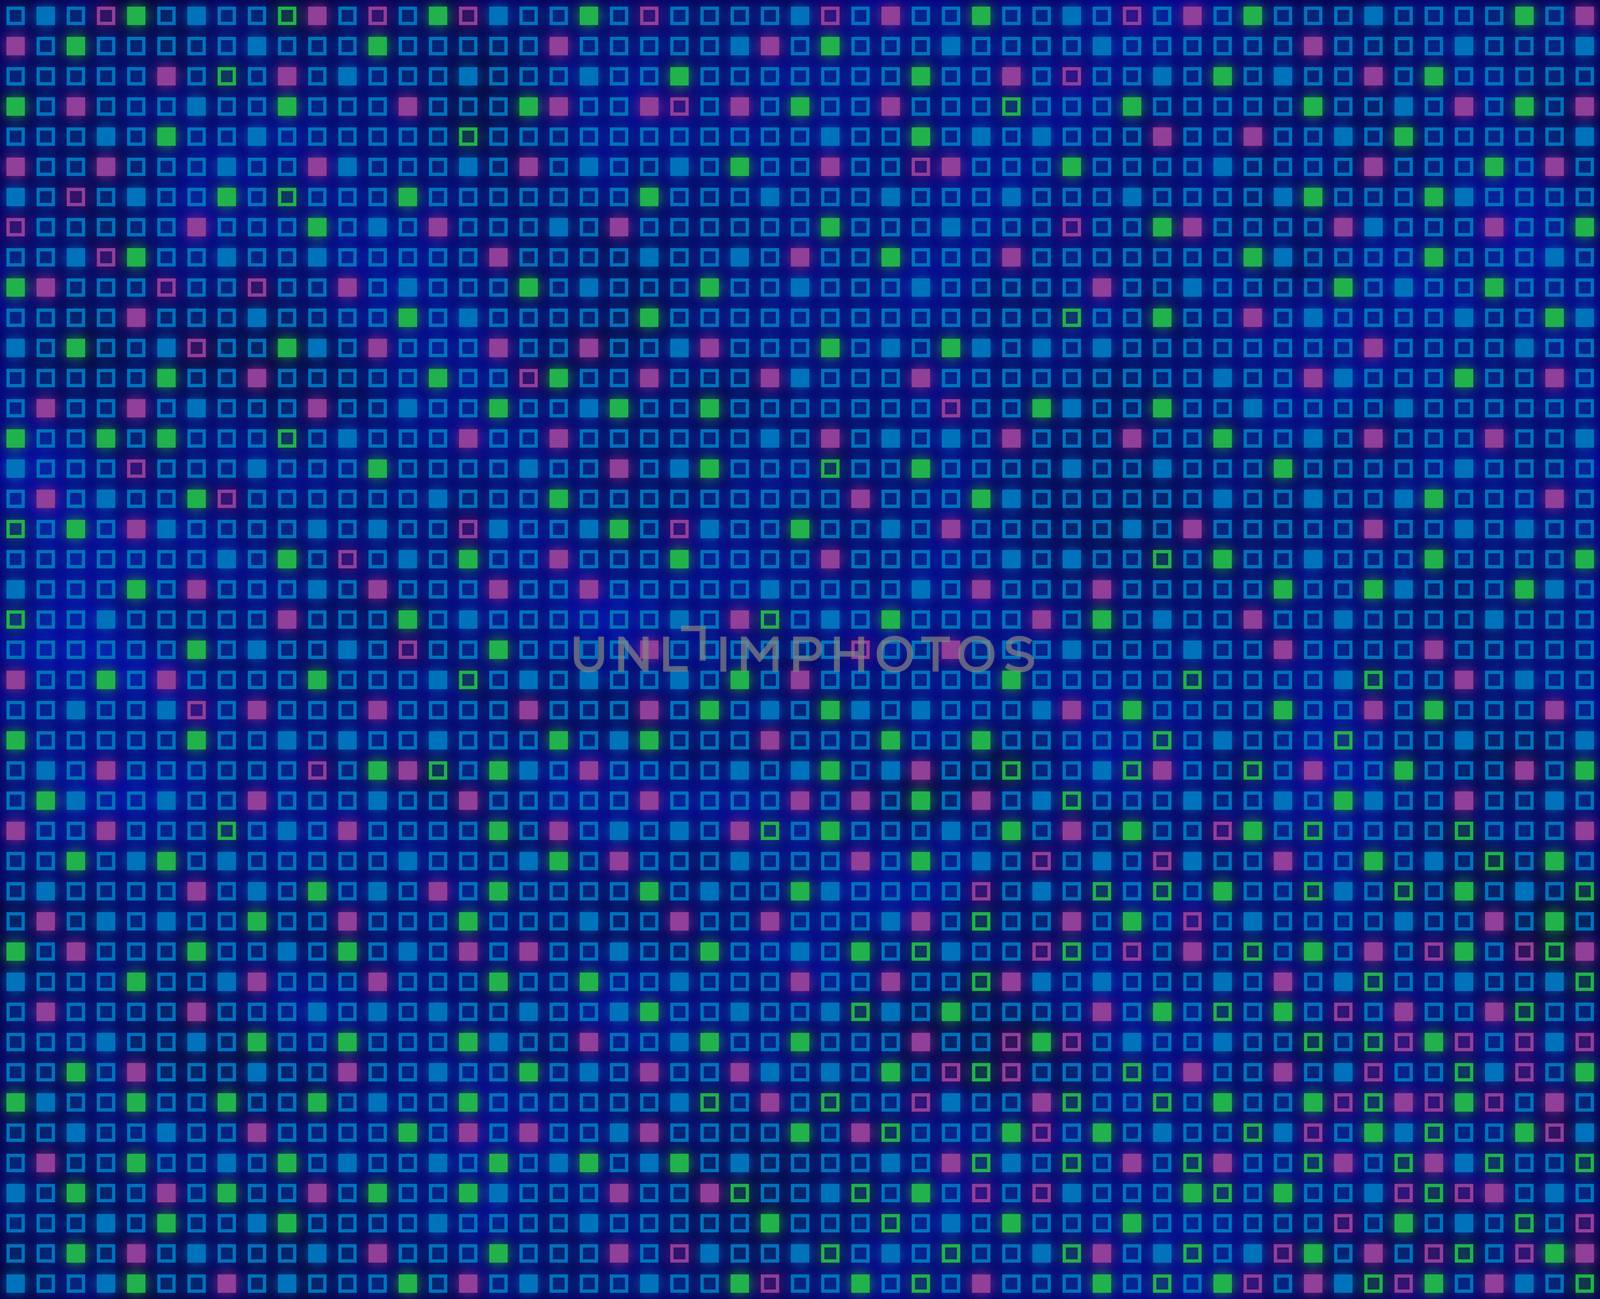 Repeating square pattern, predominantly blue, seamlessly tileabl by Balefire9